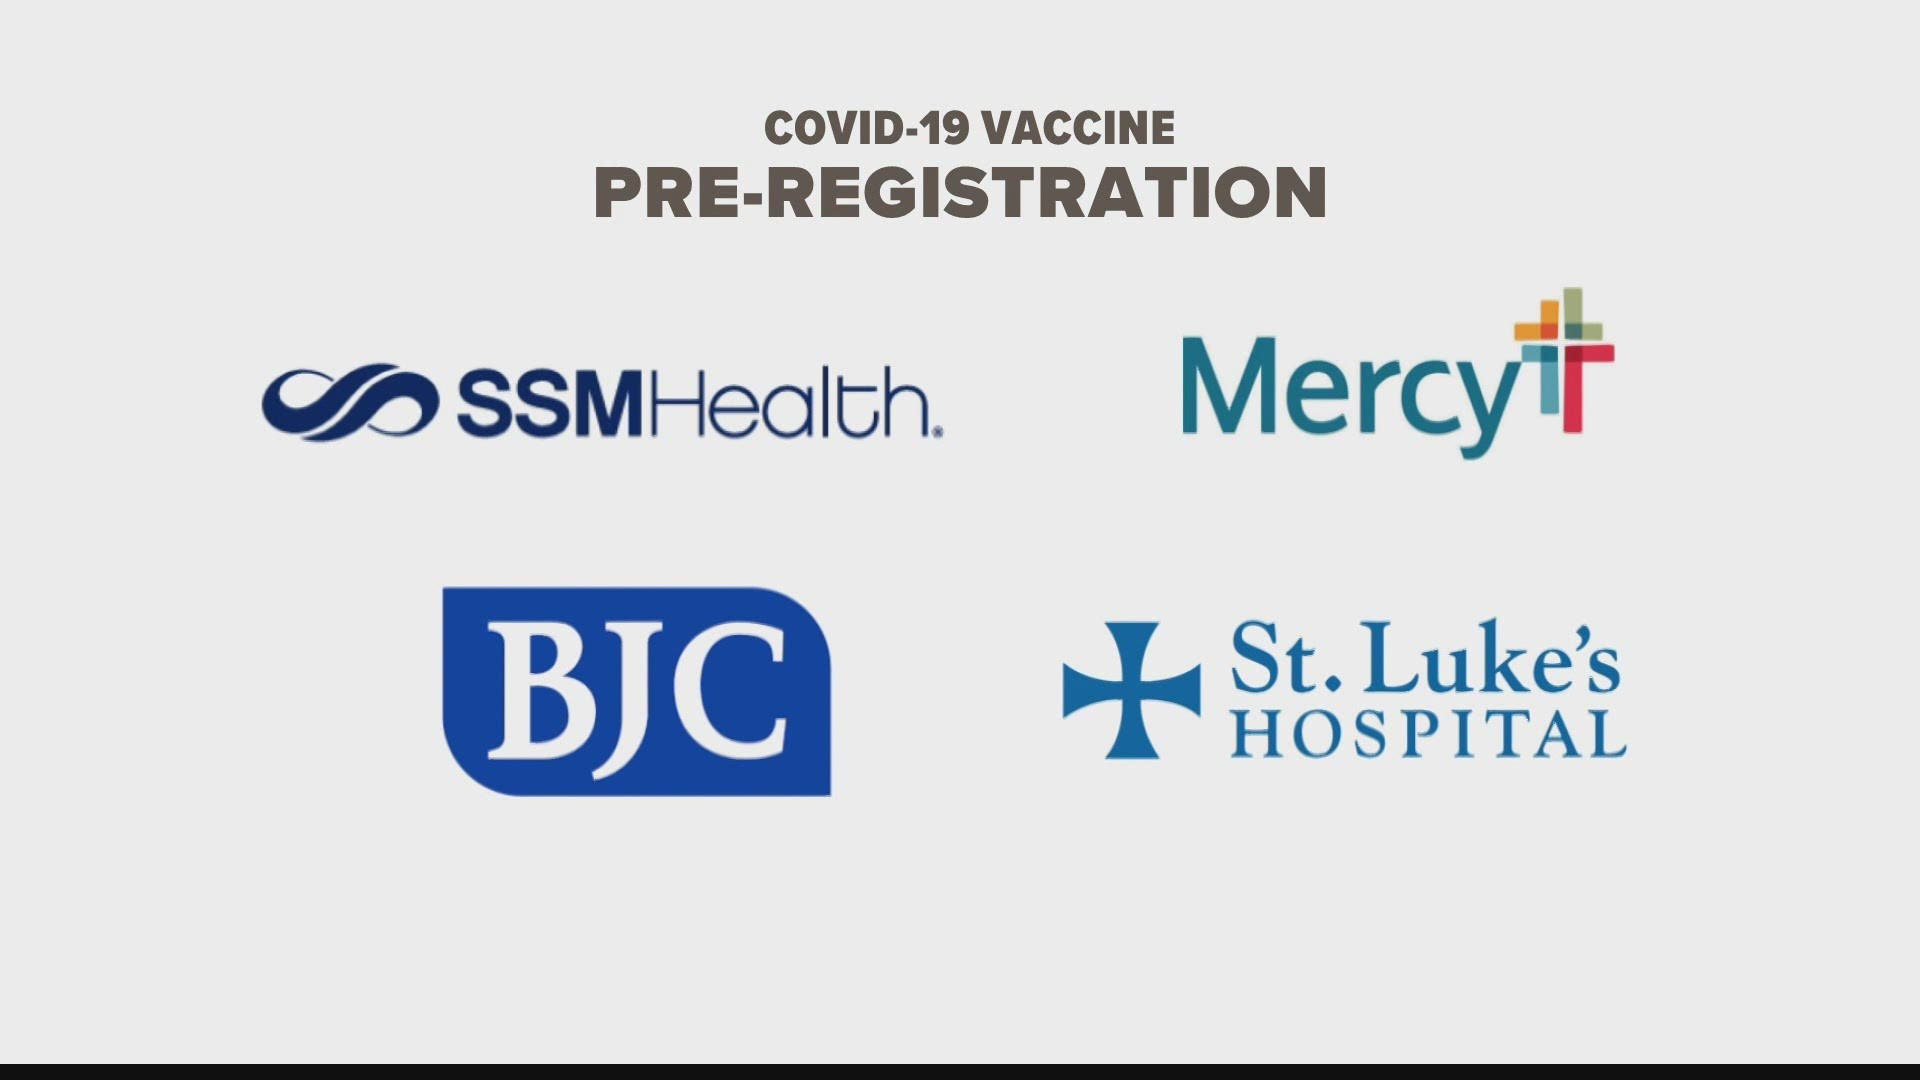 Counties in Missouri and Illinois are asking people to fill out online surveys and sign-ups for the vaccine